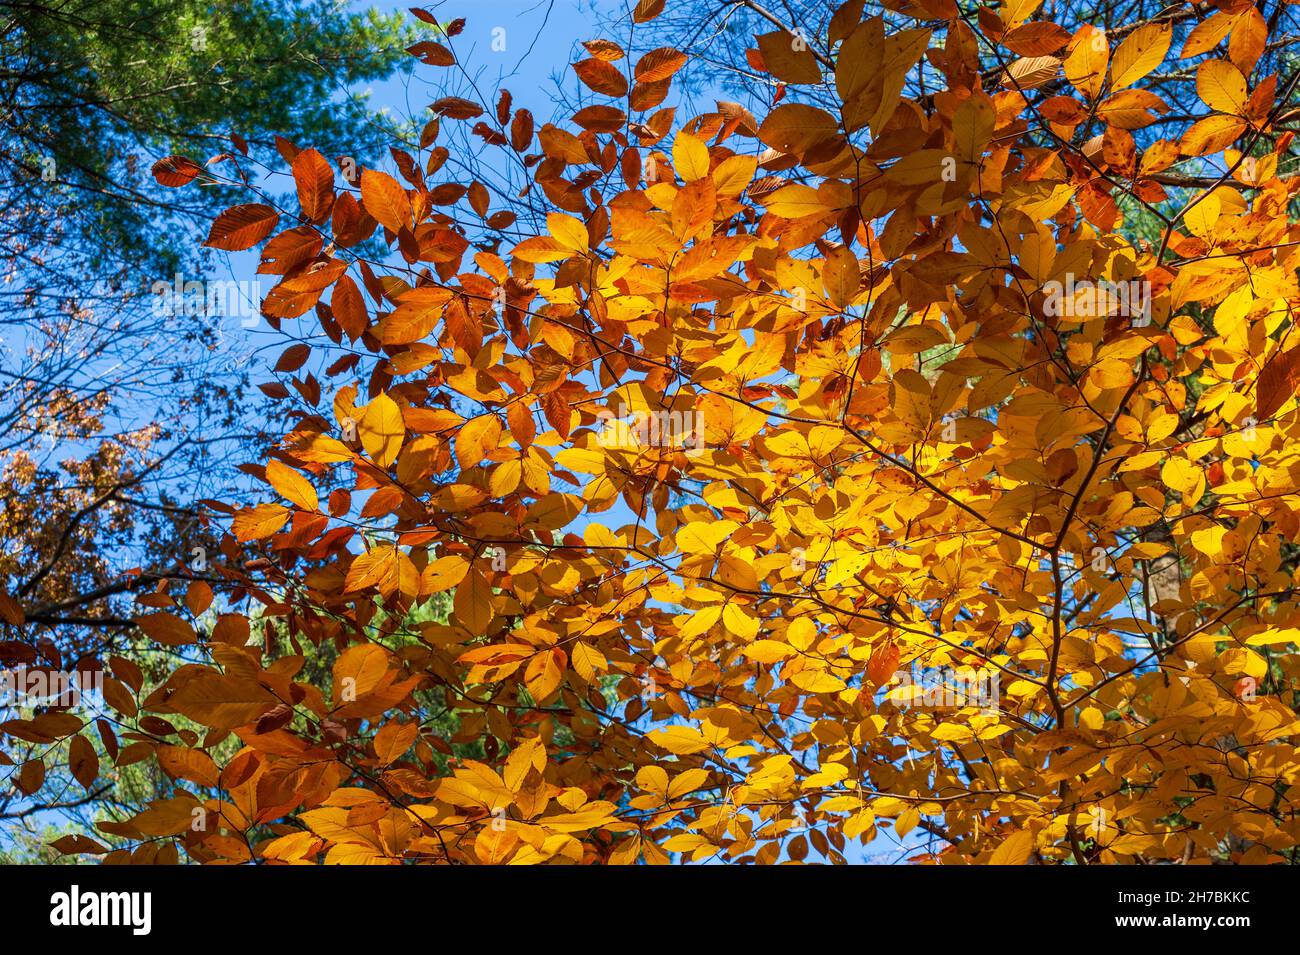 Twigs of an American beech tree (Fagus grandifolia) in peak fall foliage, with leaves in shades of yellow. Assabet River National Wildlife Refuge, MA Stock Photo